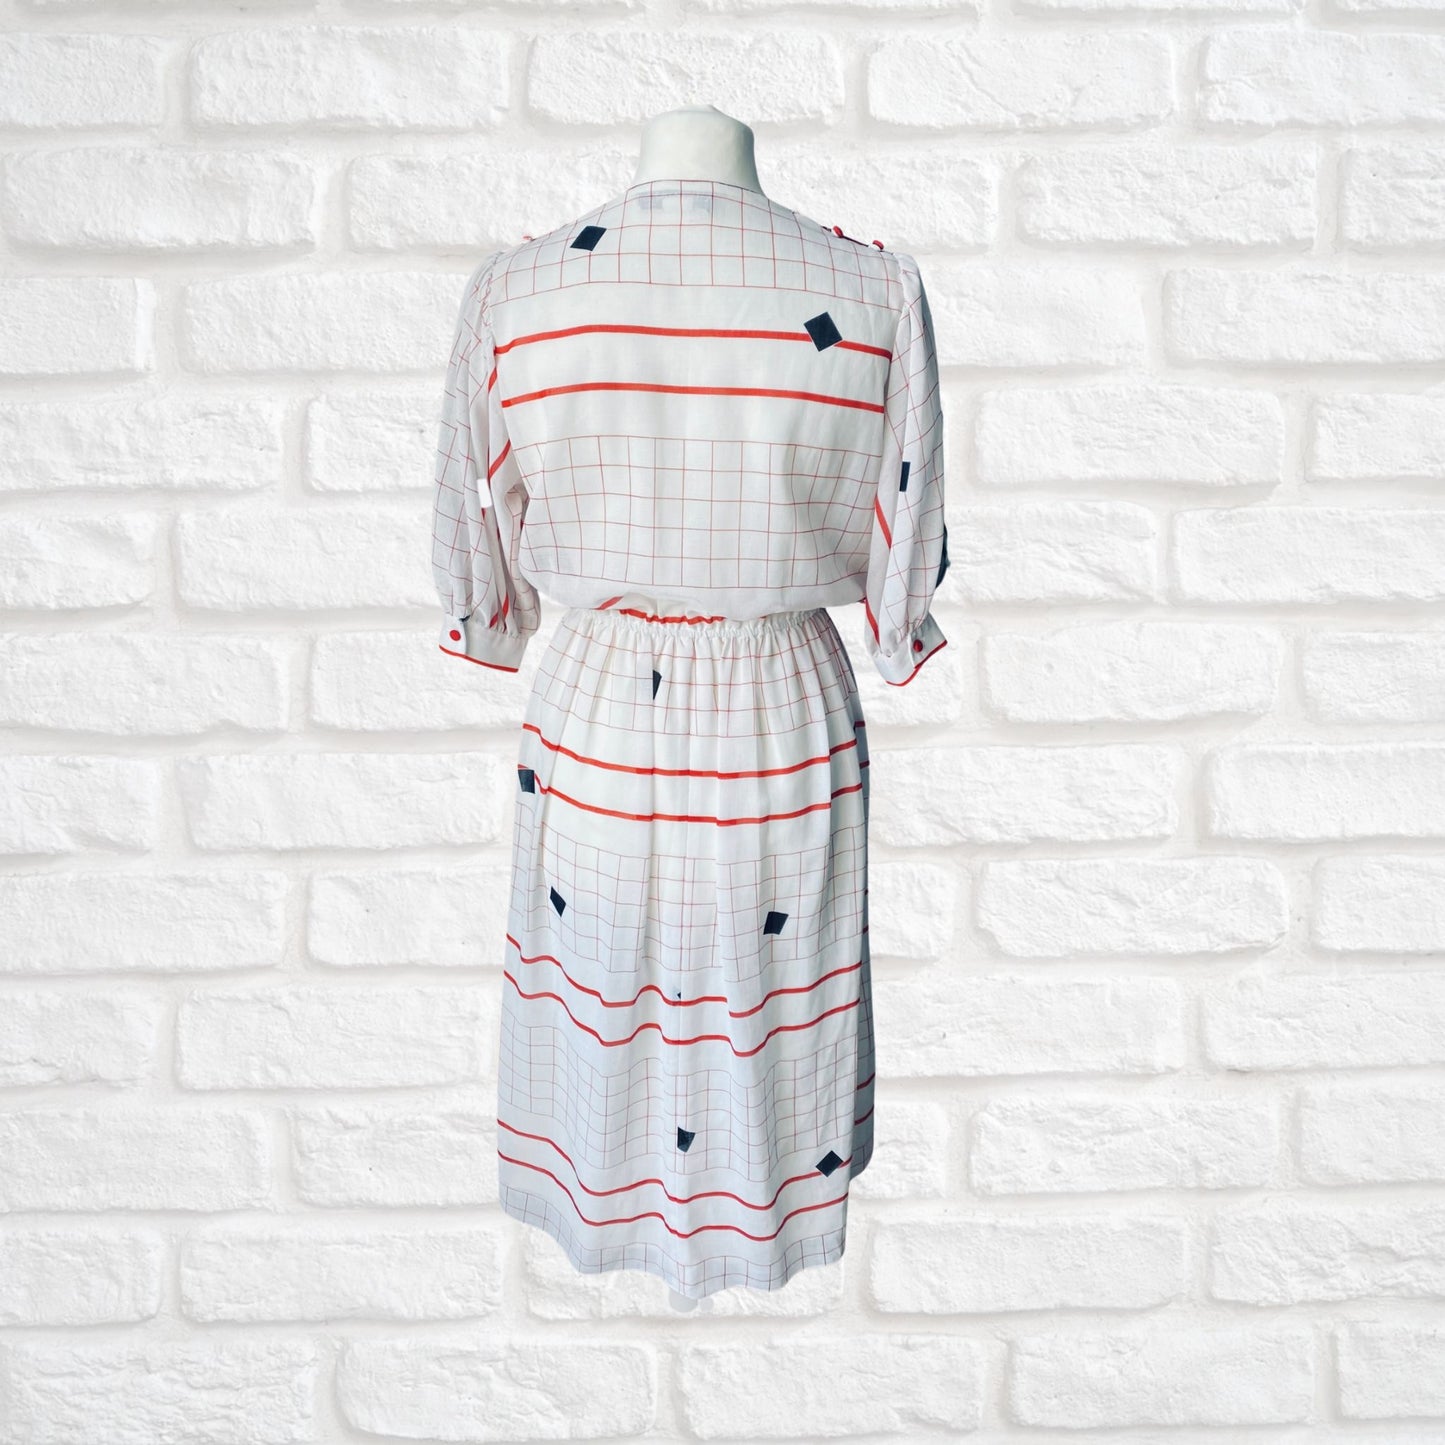 80s white, red and black geometric print lightweight Summer vintage midi dress. Approx UK size 14-16